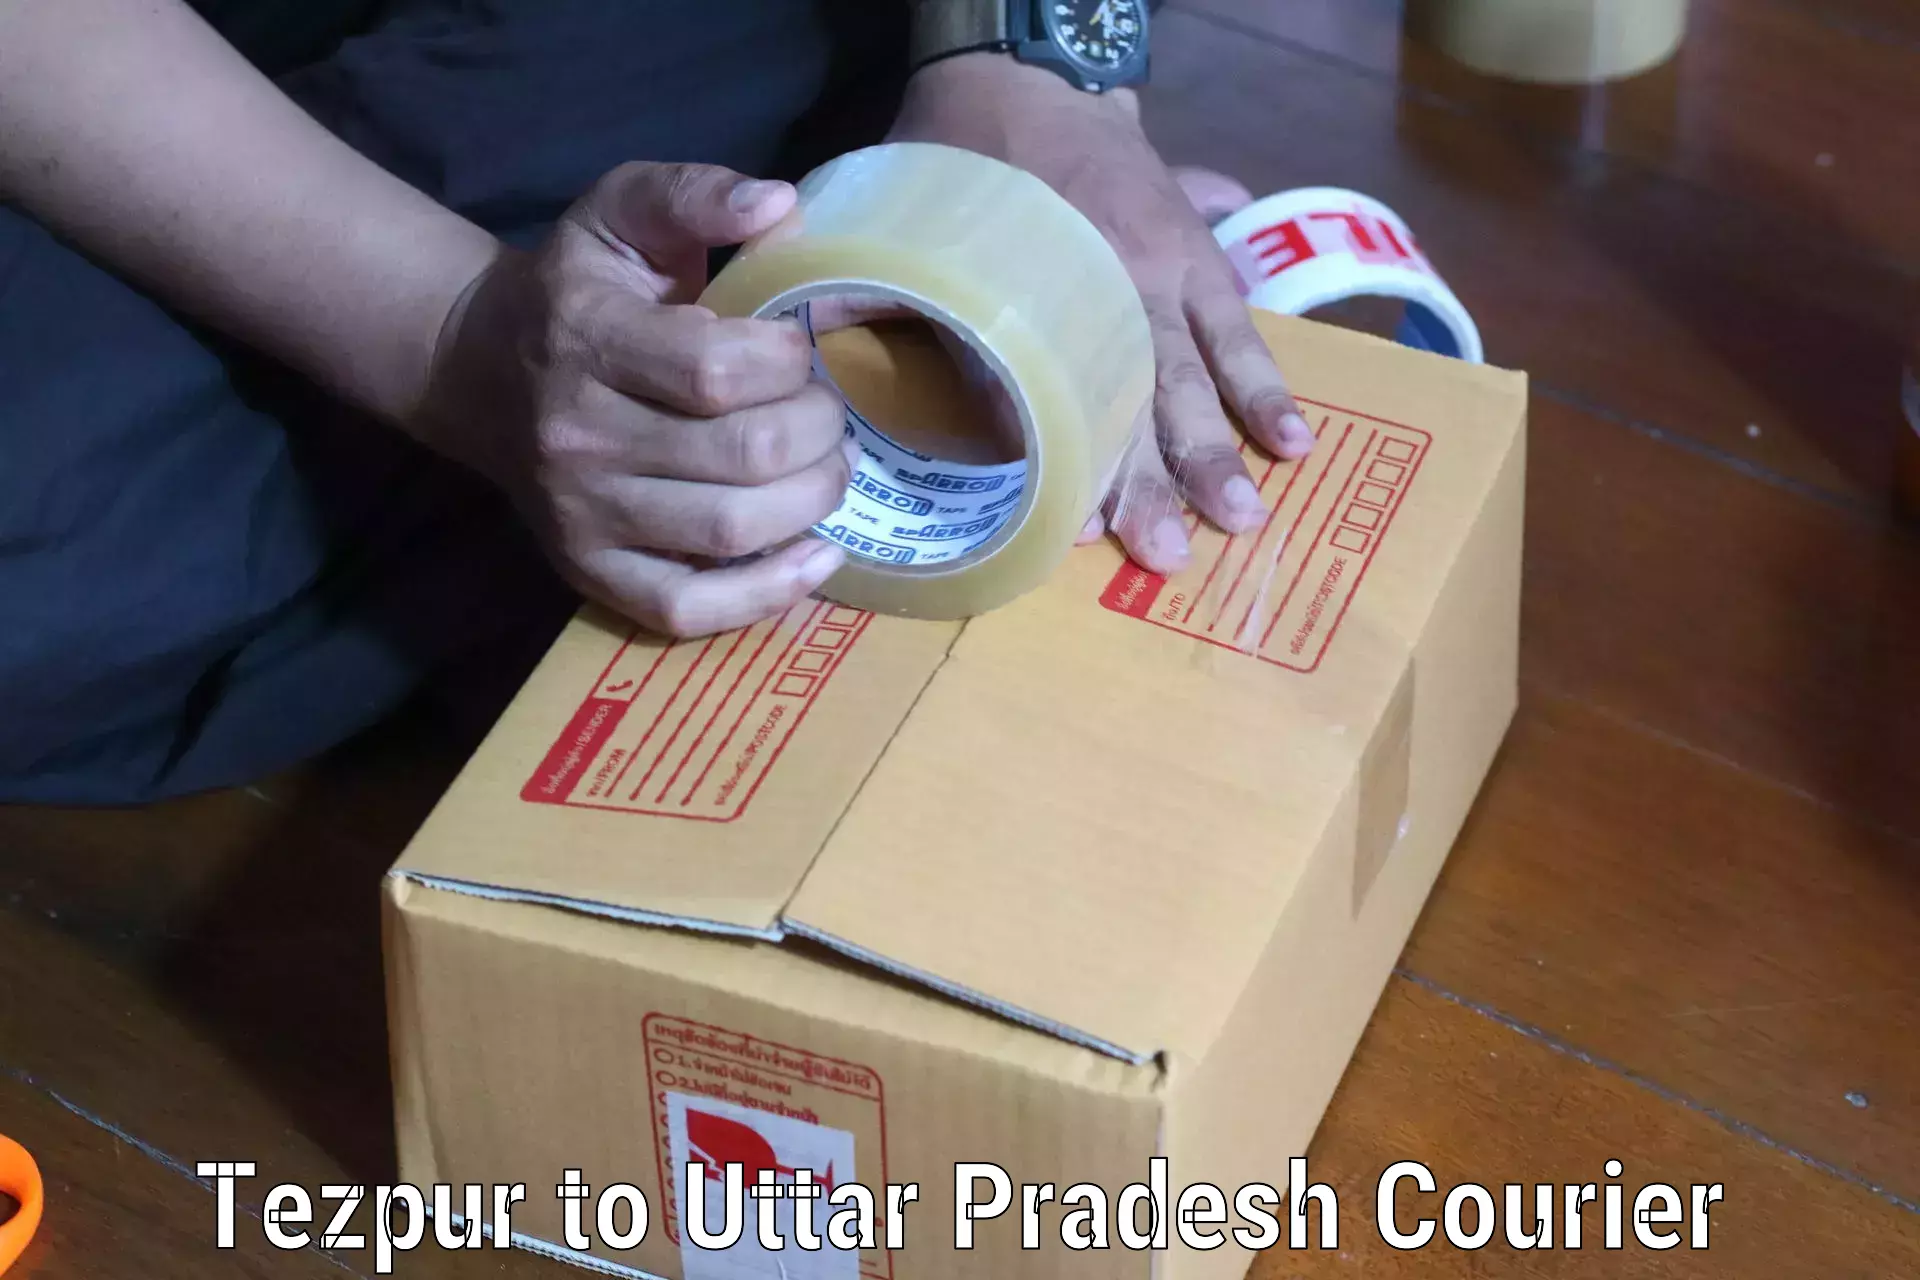 High-priority parcel service Tezpur to Mohammadi